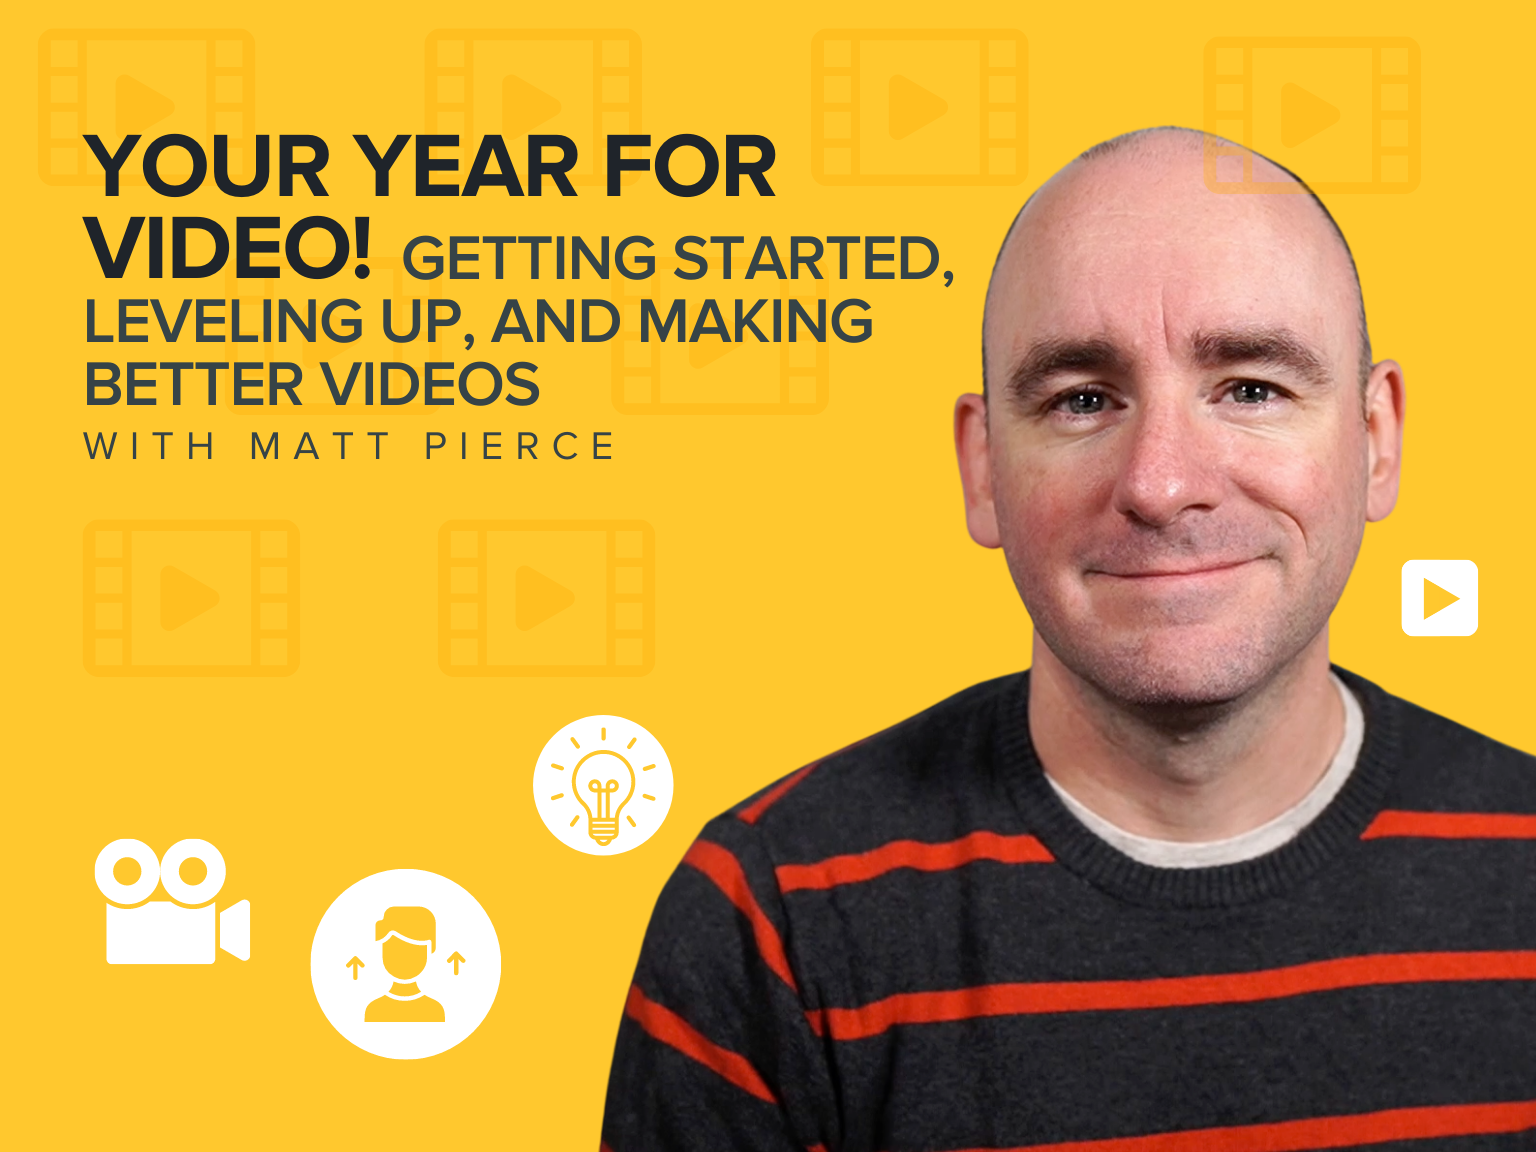 Your Year for Video! Getting Started, Leveling Up, and Making Better Videos